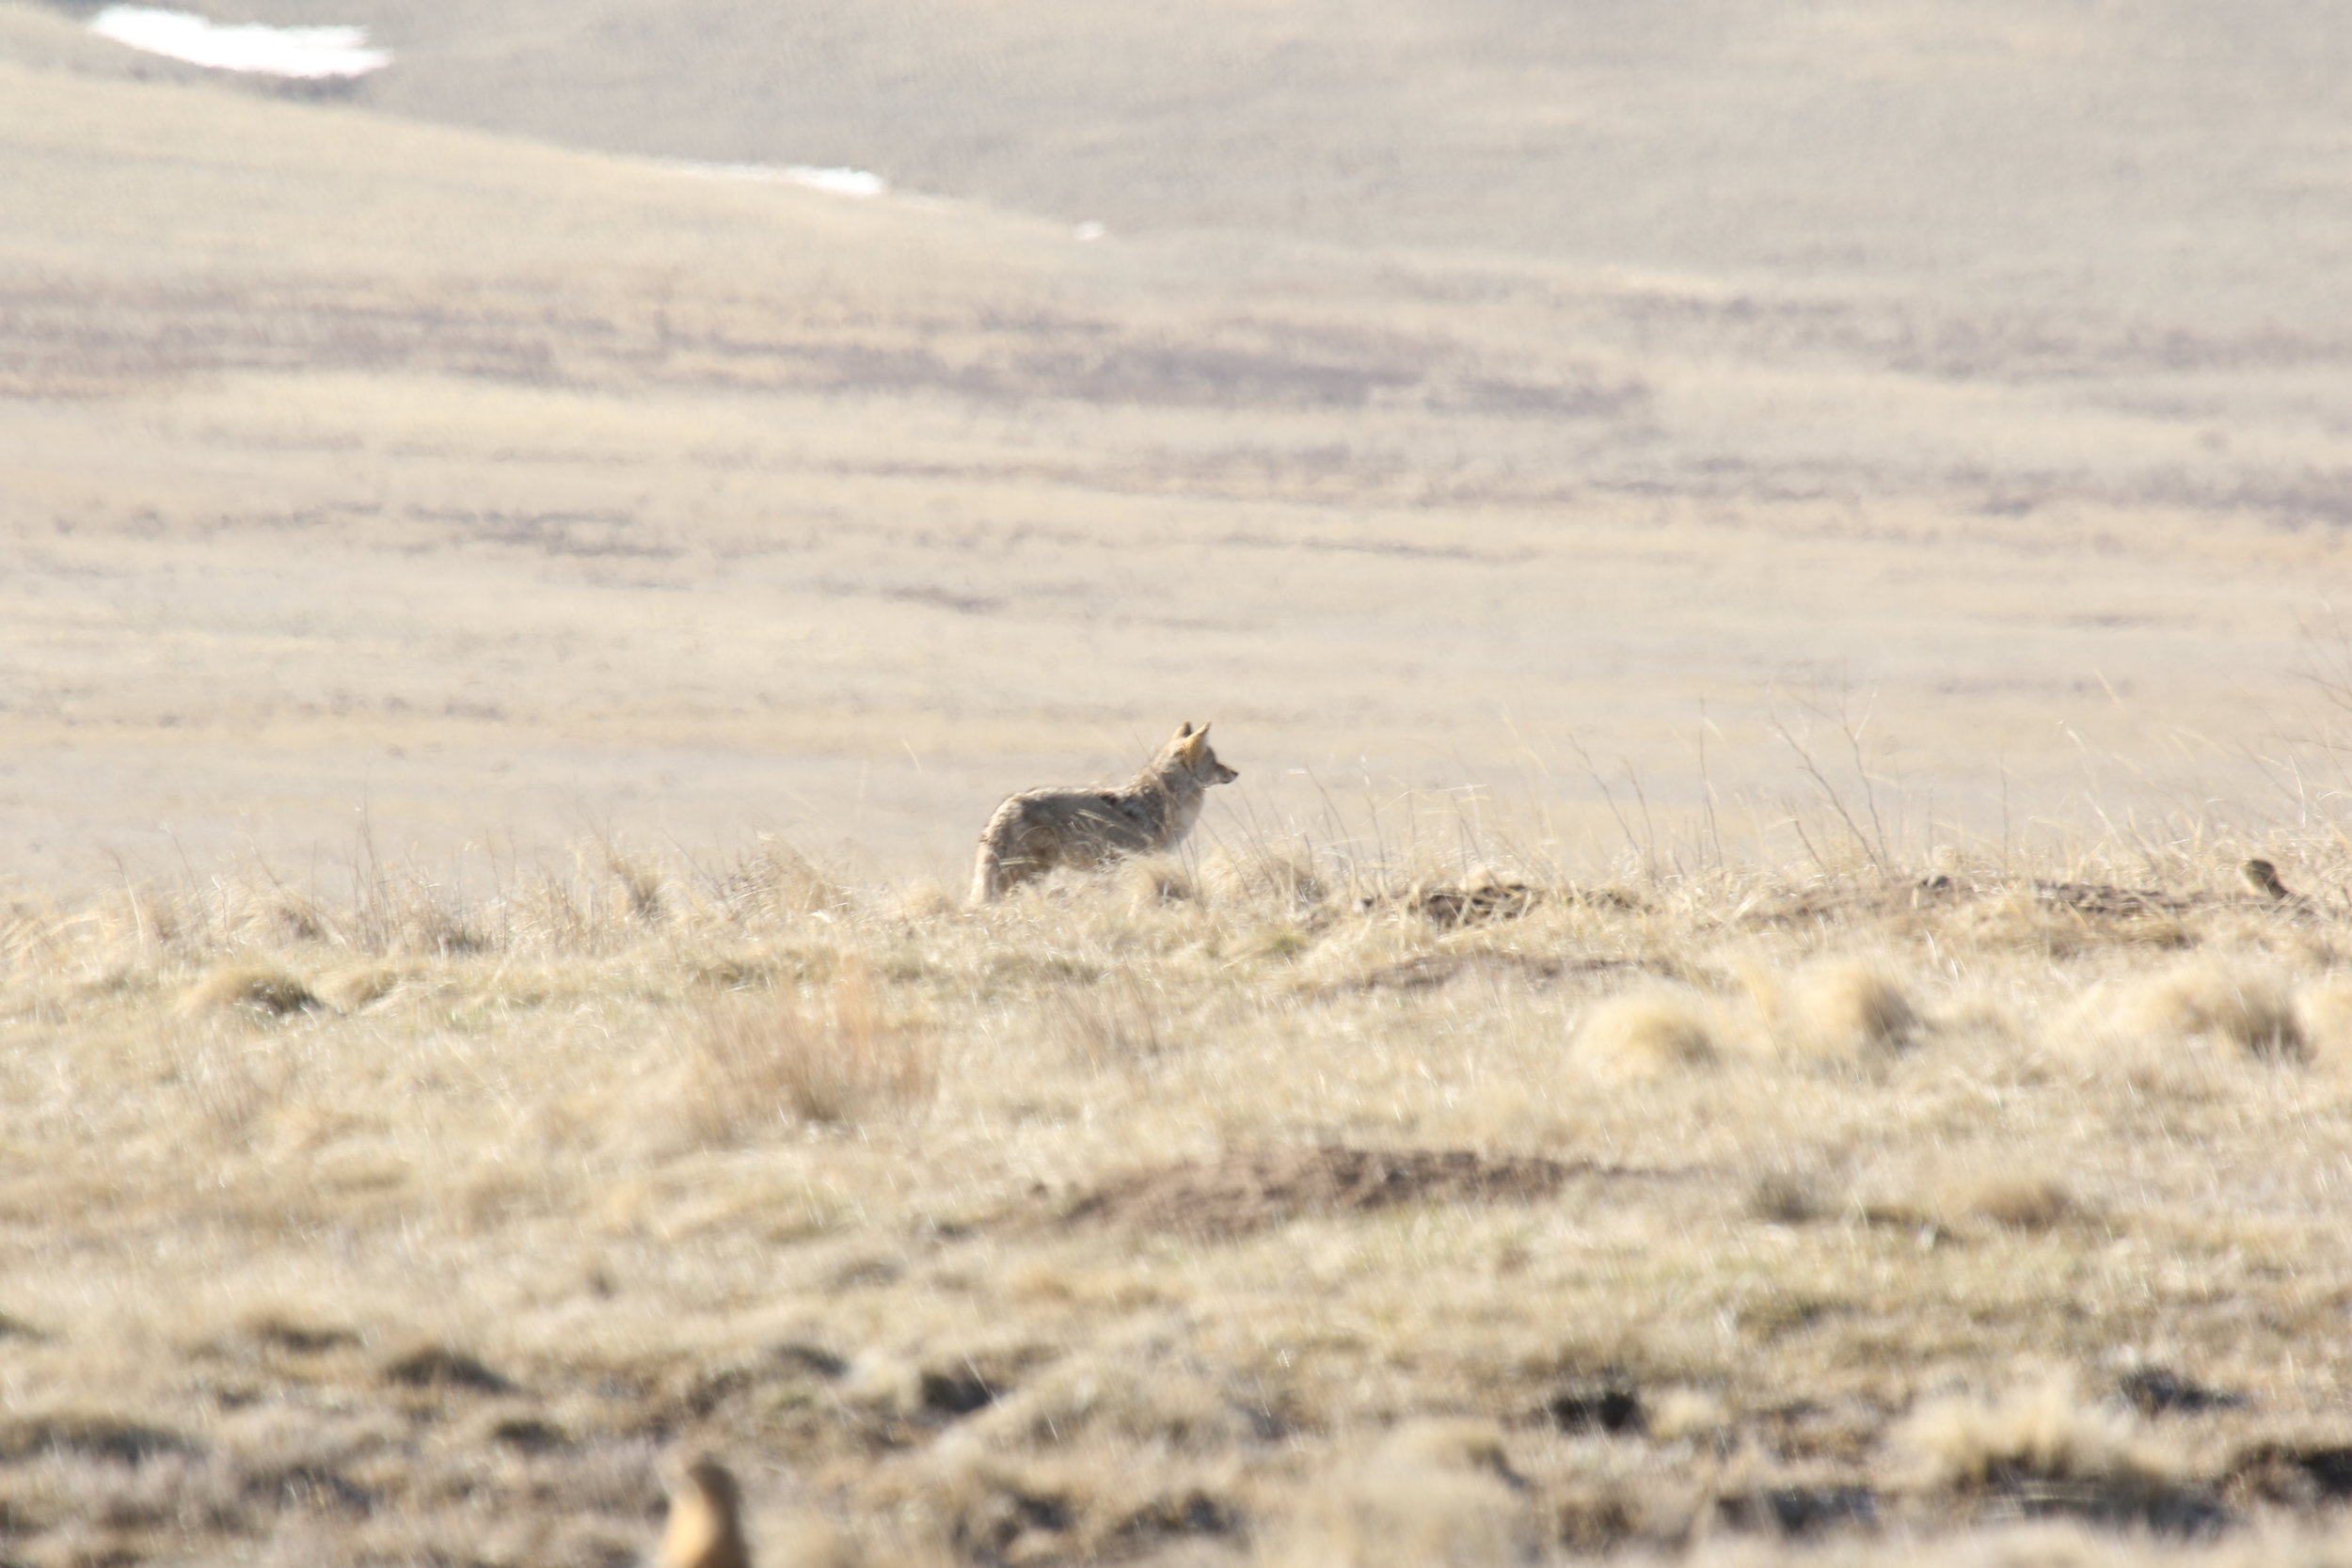  A coyote has been spotted by the prairie dogs it's been stalking.  ©MRR 2017  